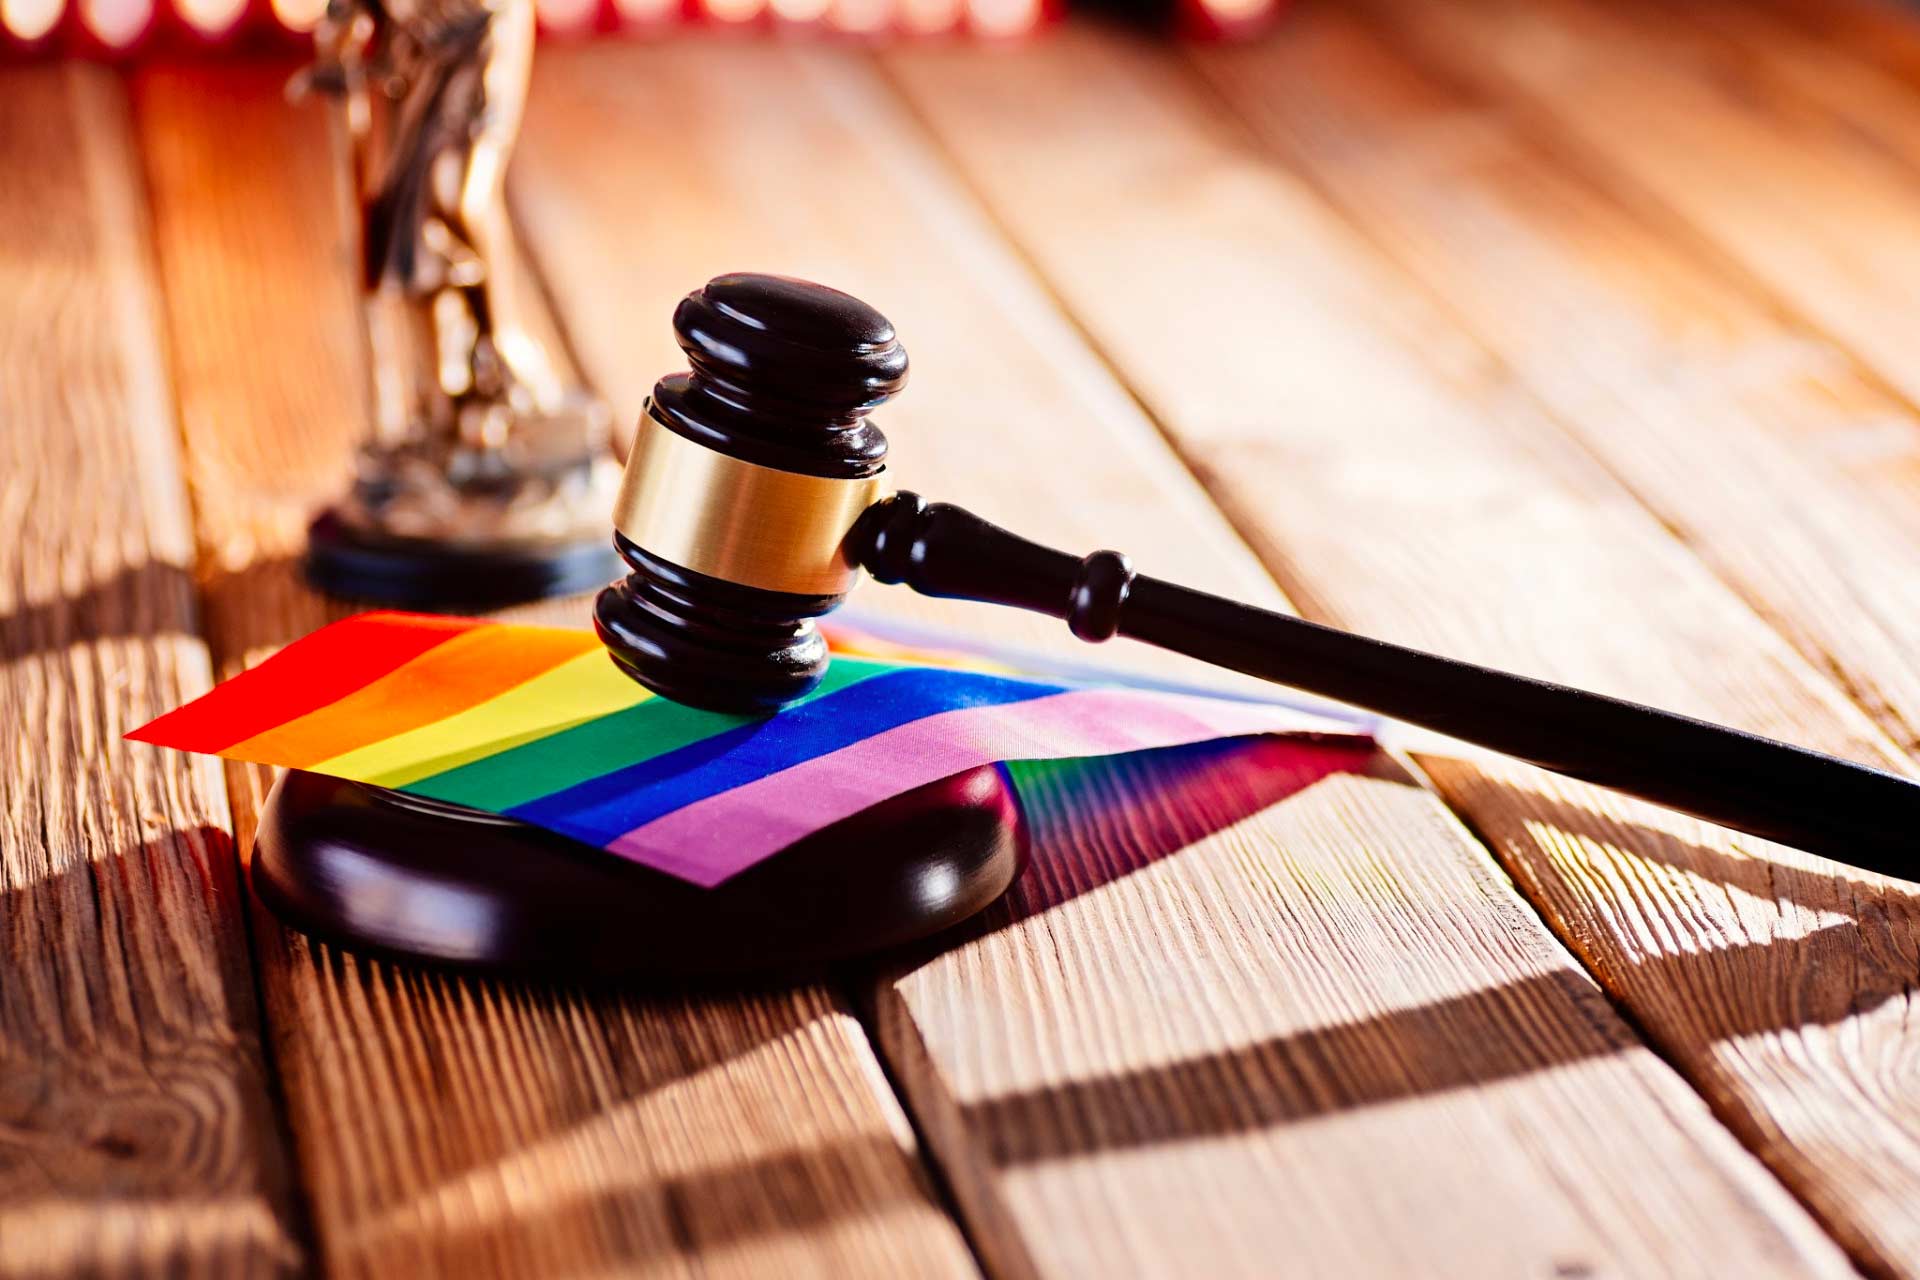 Court gavel resting on a rainbow flag, symbolizing the victories and challenges LGBTQ people face.